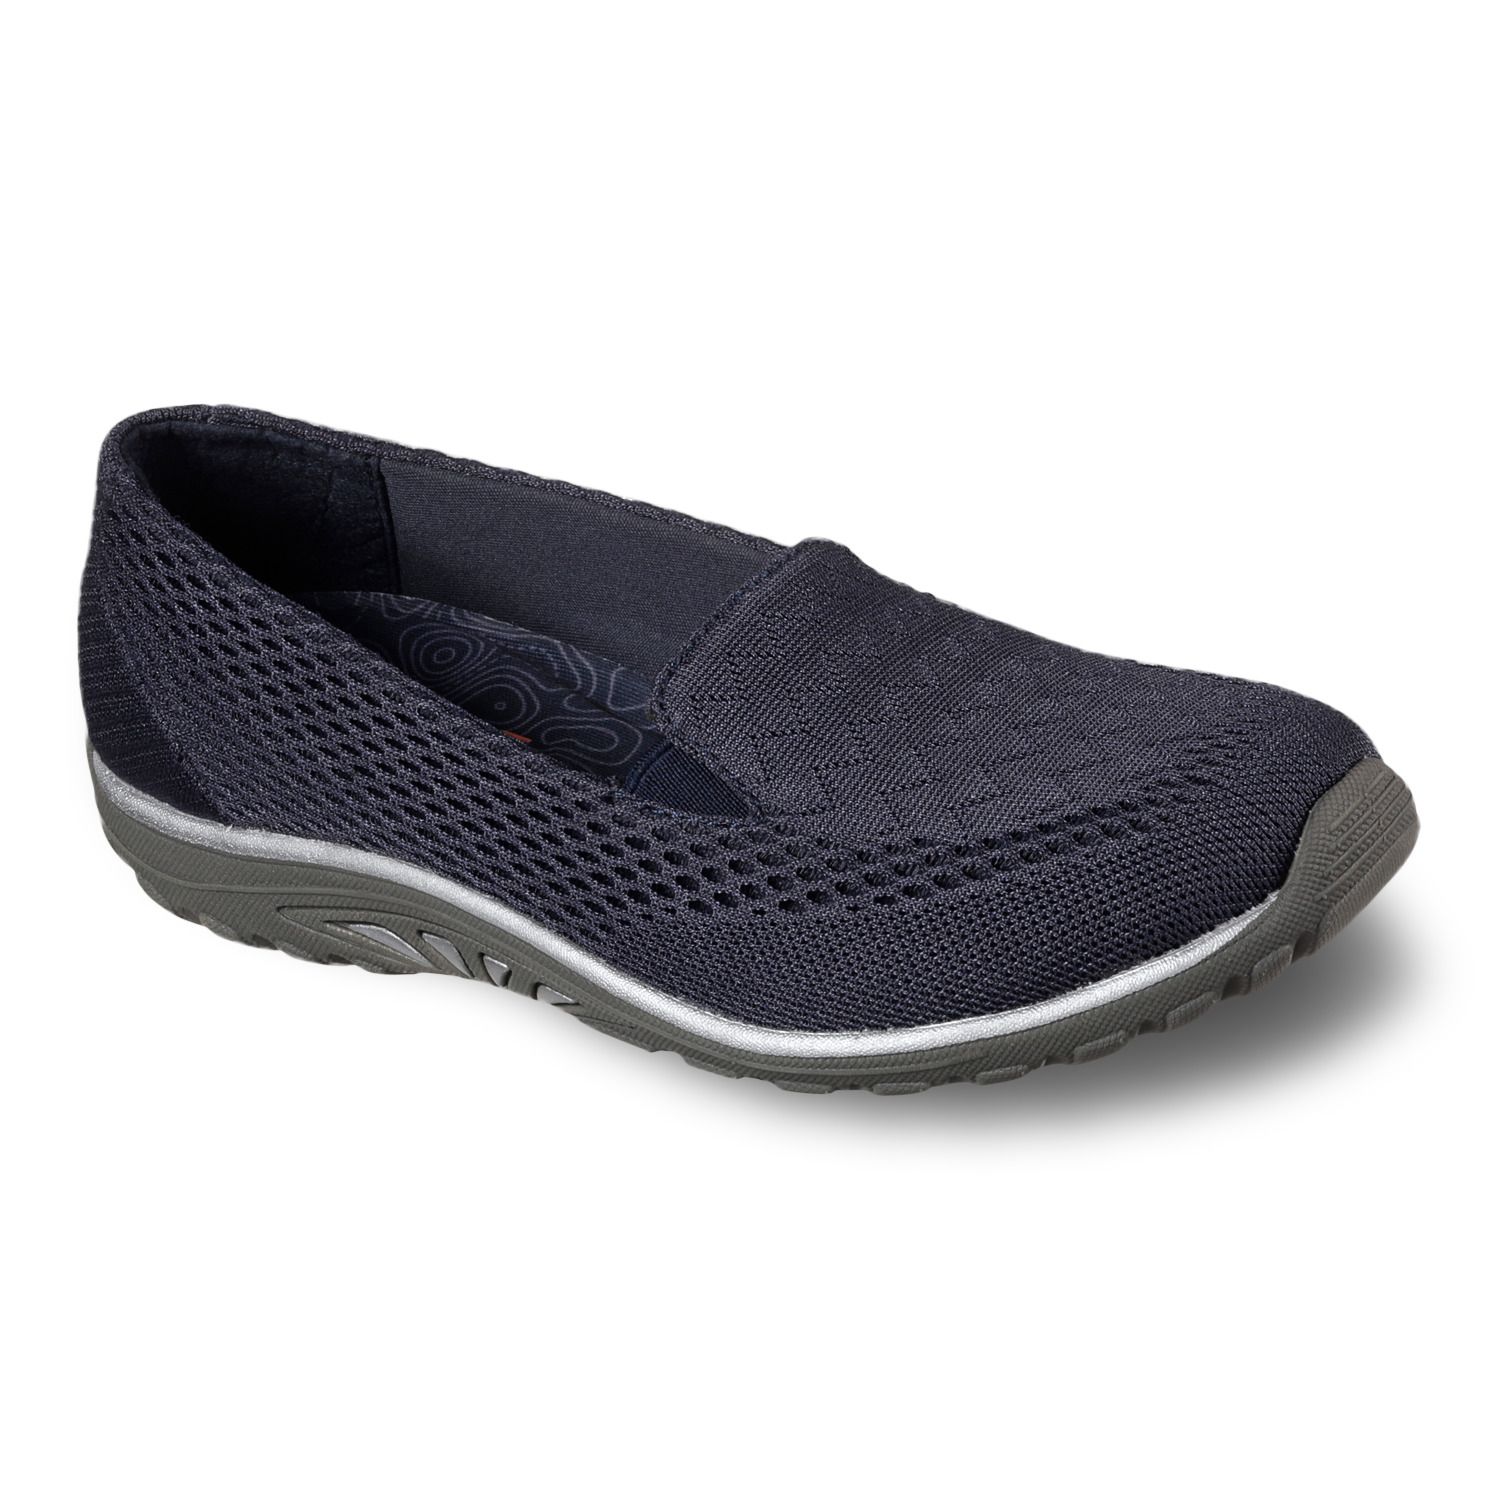 sketchers for women relaxed fit